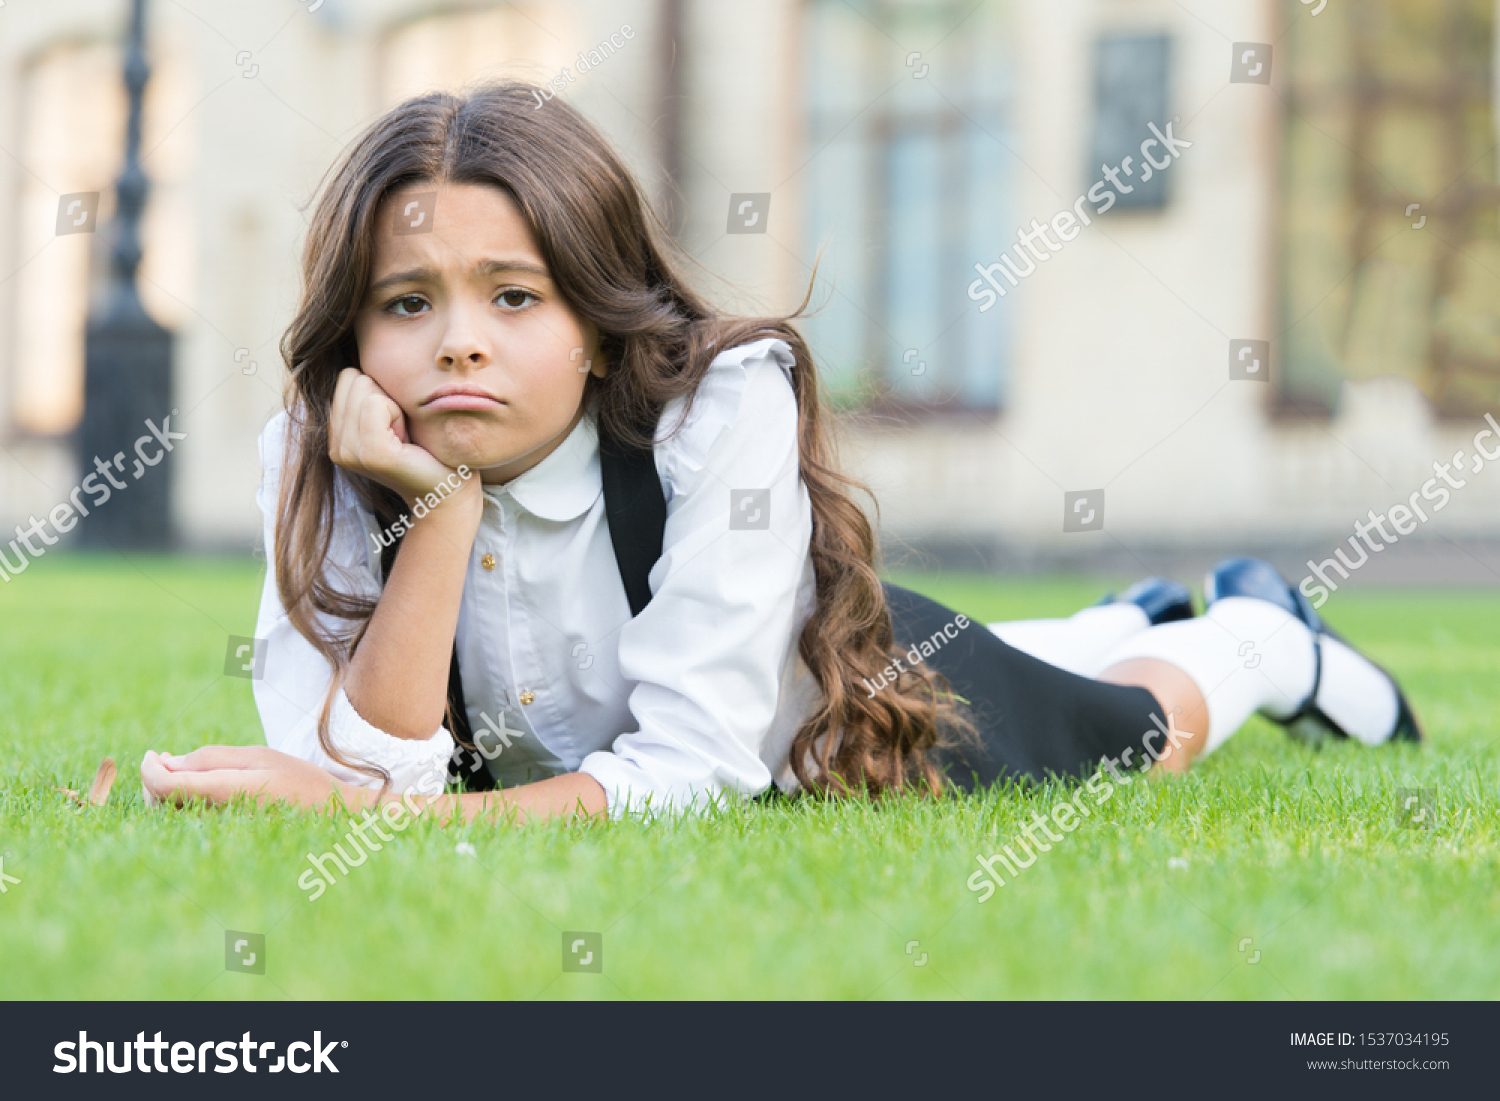 Sad without a smile. Sad schoolgirl relax on green grass. Adorable little child with sad emotion on face. Feeling sad and unhappy. Sadness and depression. School problems. #1537034195